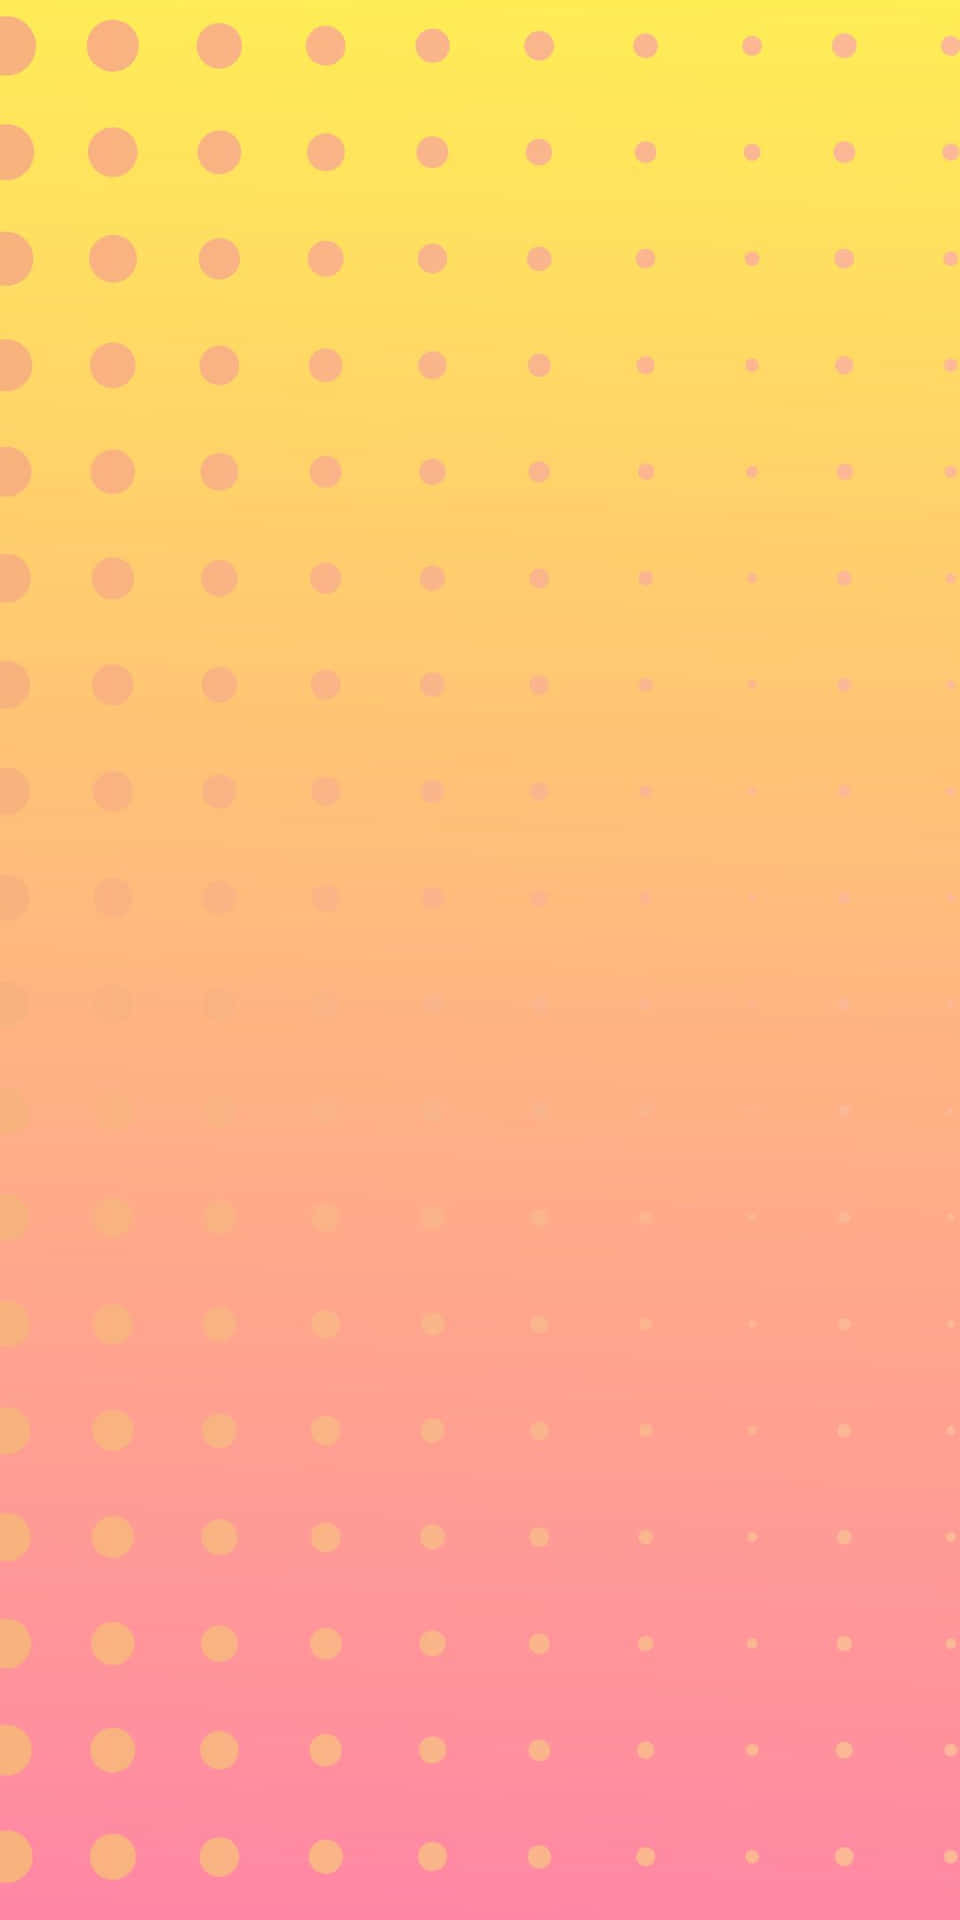 Pixel 3 Background Half-Tone Dots In Gradient Pink And Yellow